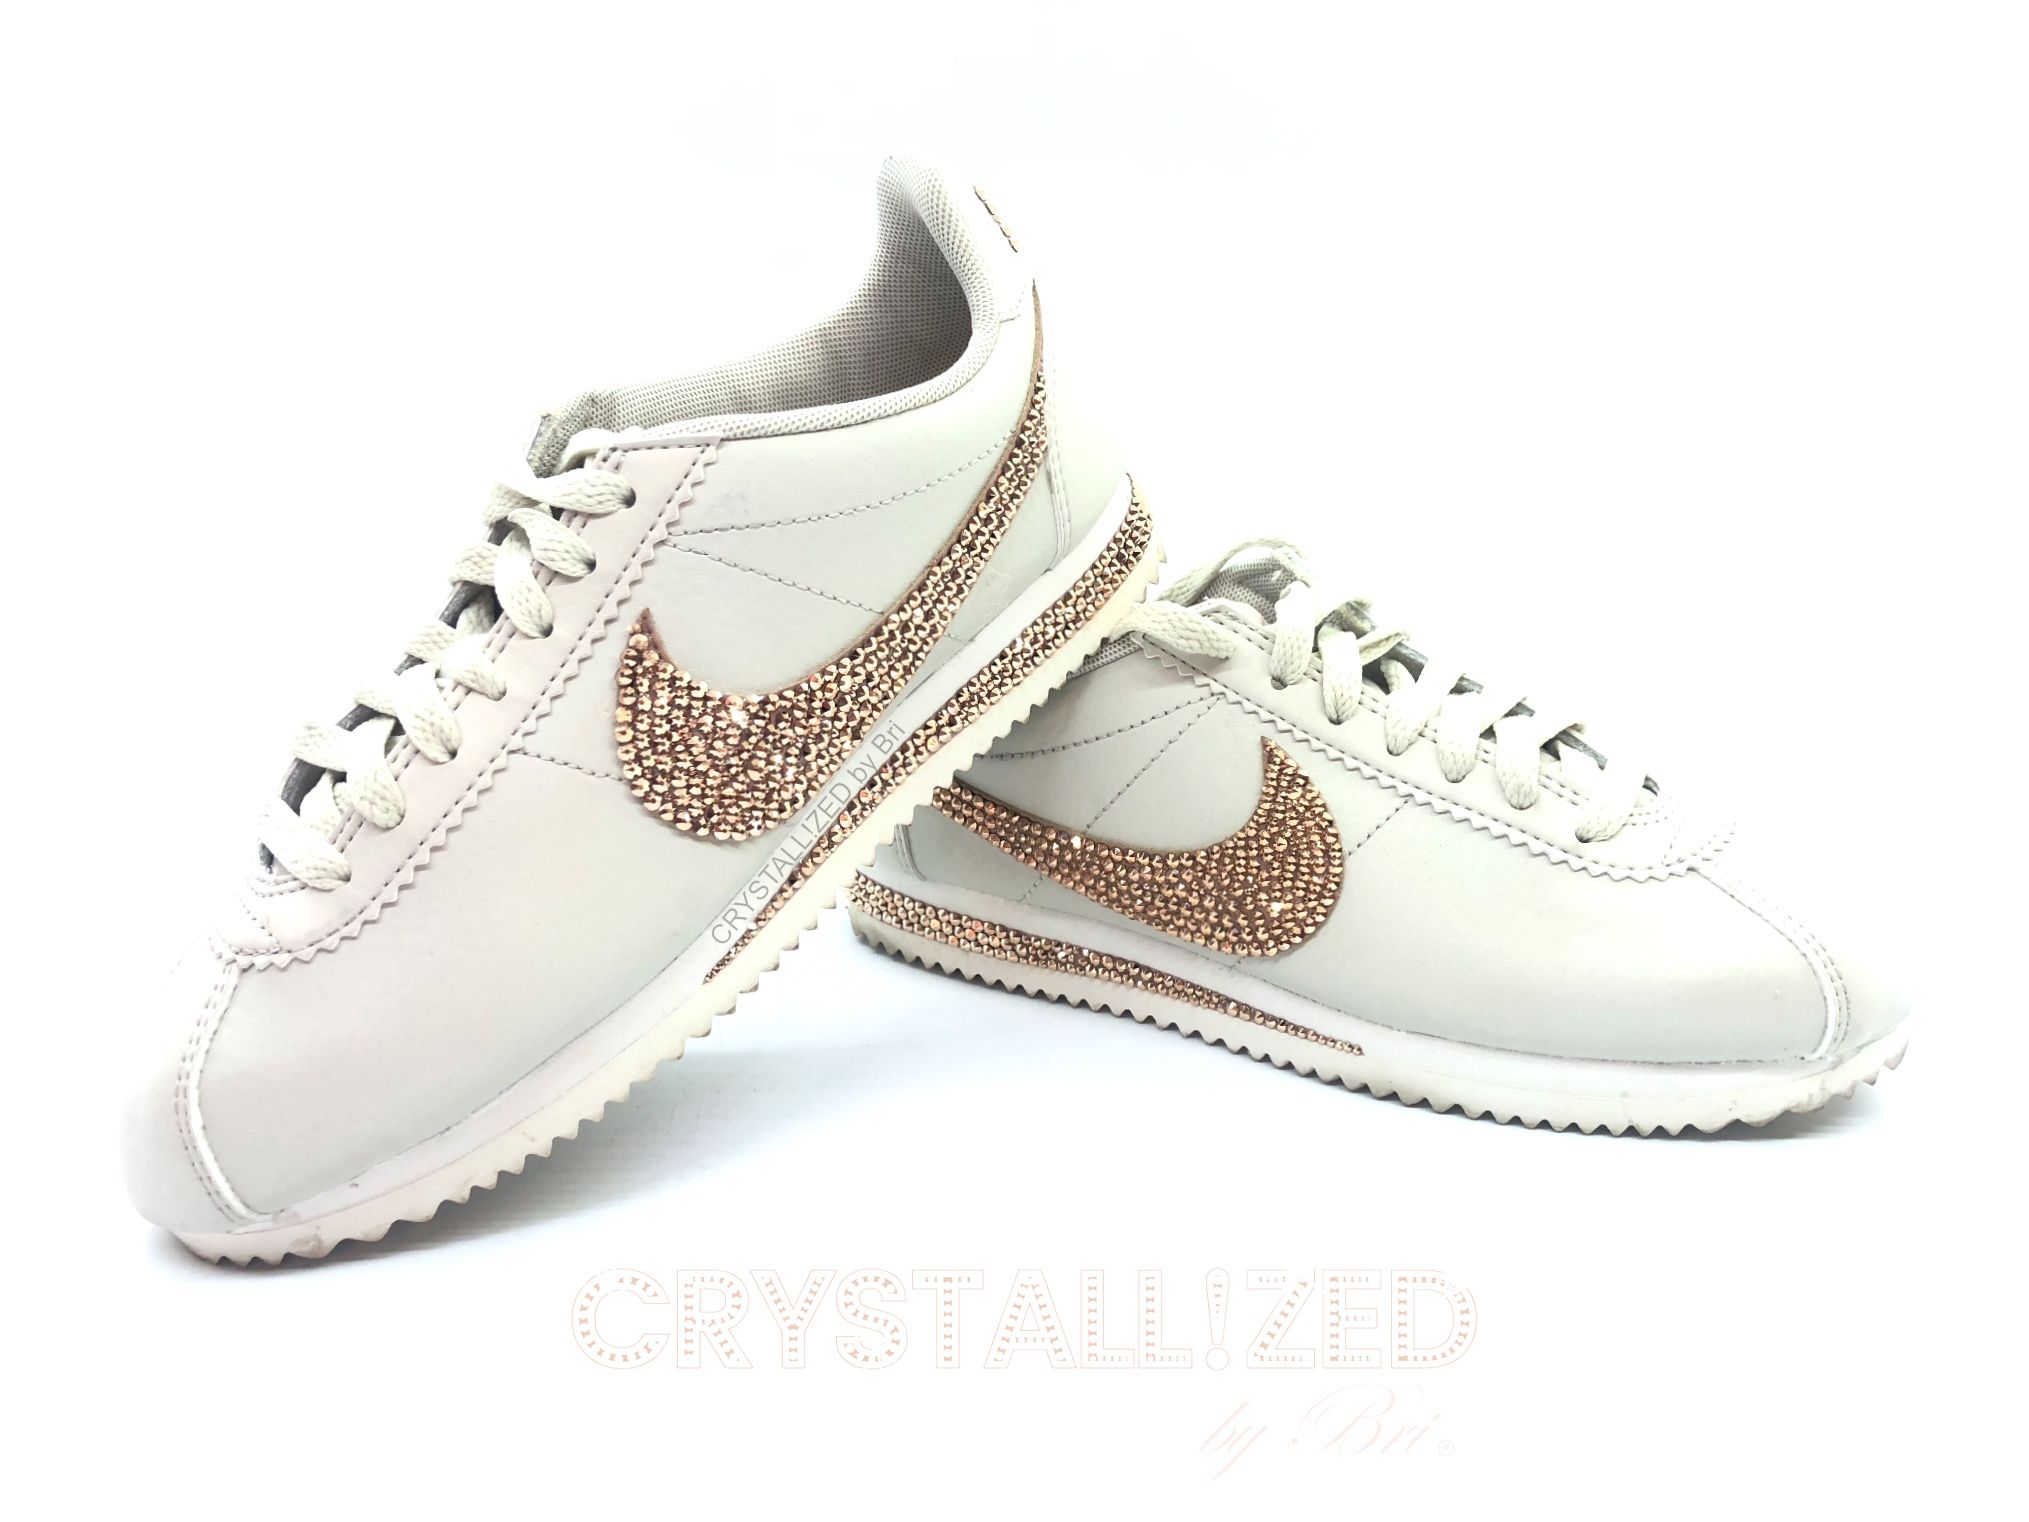 Buy Hand Made Crystallized Classic Cortez Sneakers Bling European Crystals Bedazzled Gold, made to order CRYSTALL!ZED by Bri, LLC | CustomMade.com